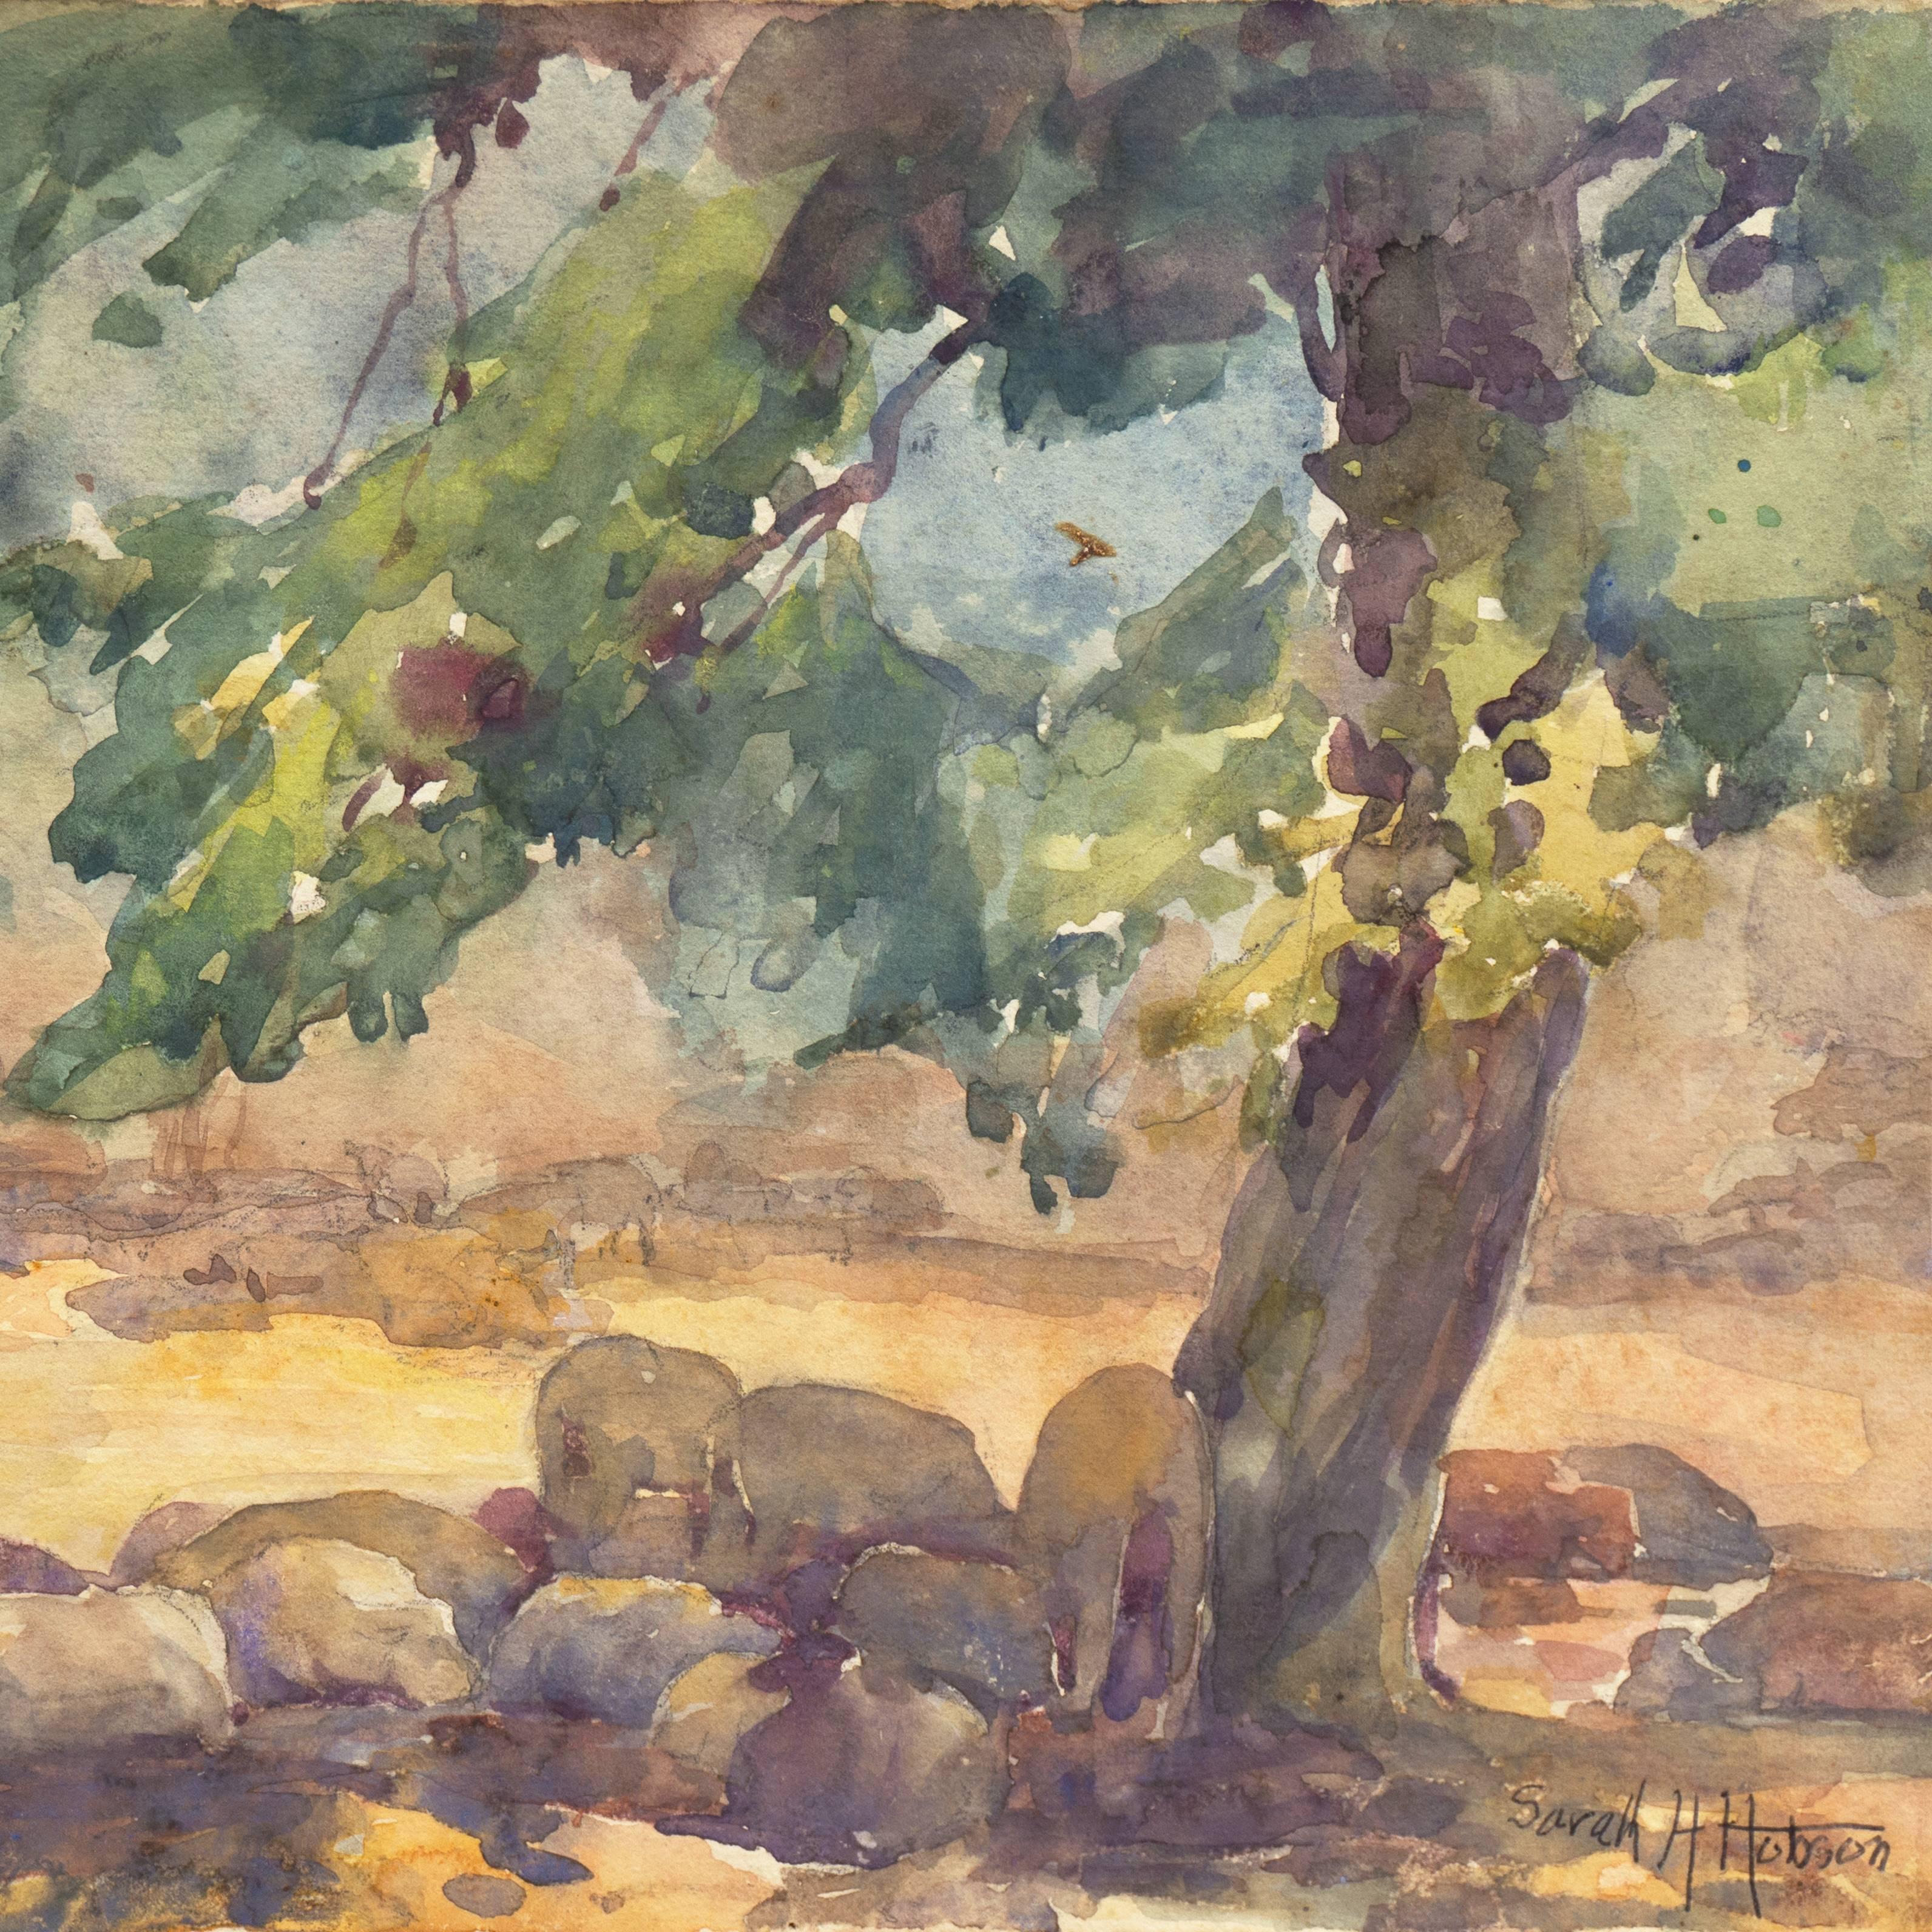 A view of a warmly lit clearing with sheep resting under the branches of an oak tree.  

Signed lower right, 'Sarah H. Hobson' and painted circa 1935.

Sarah Villarette Hoover Hobson studied at the Art Institute of Chicago in the 1920s before moving